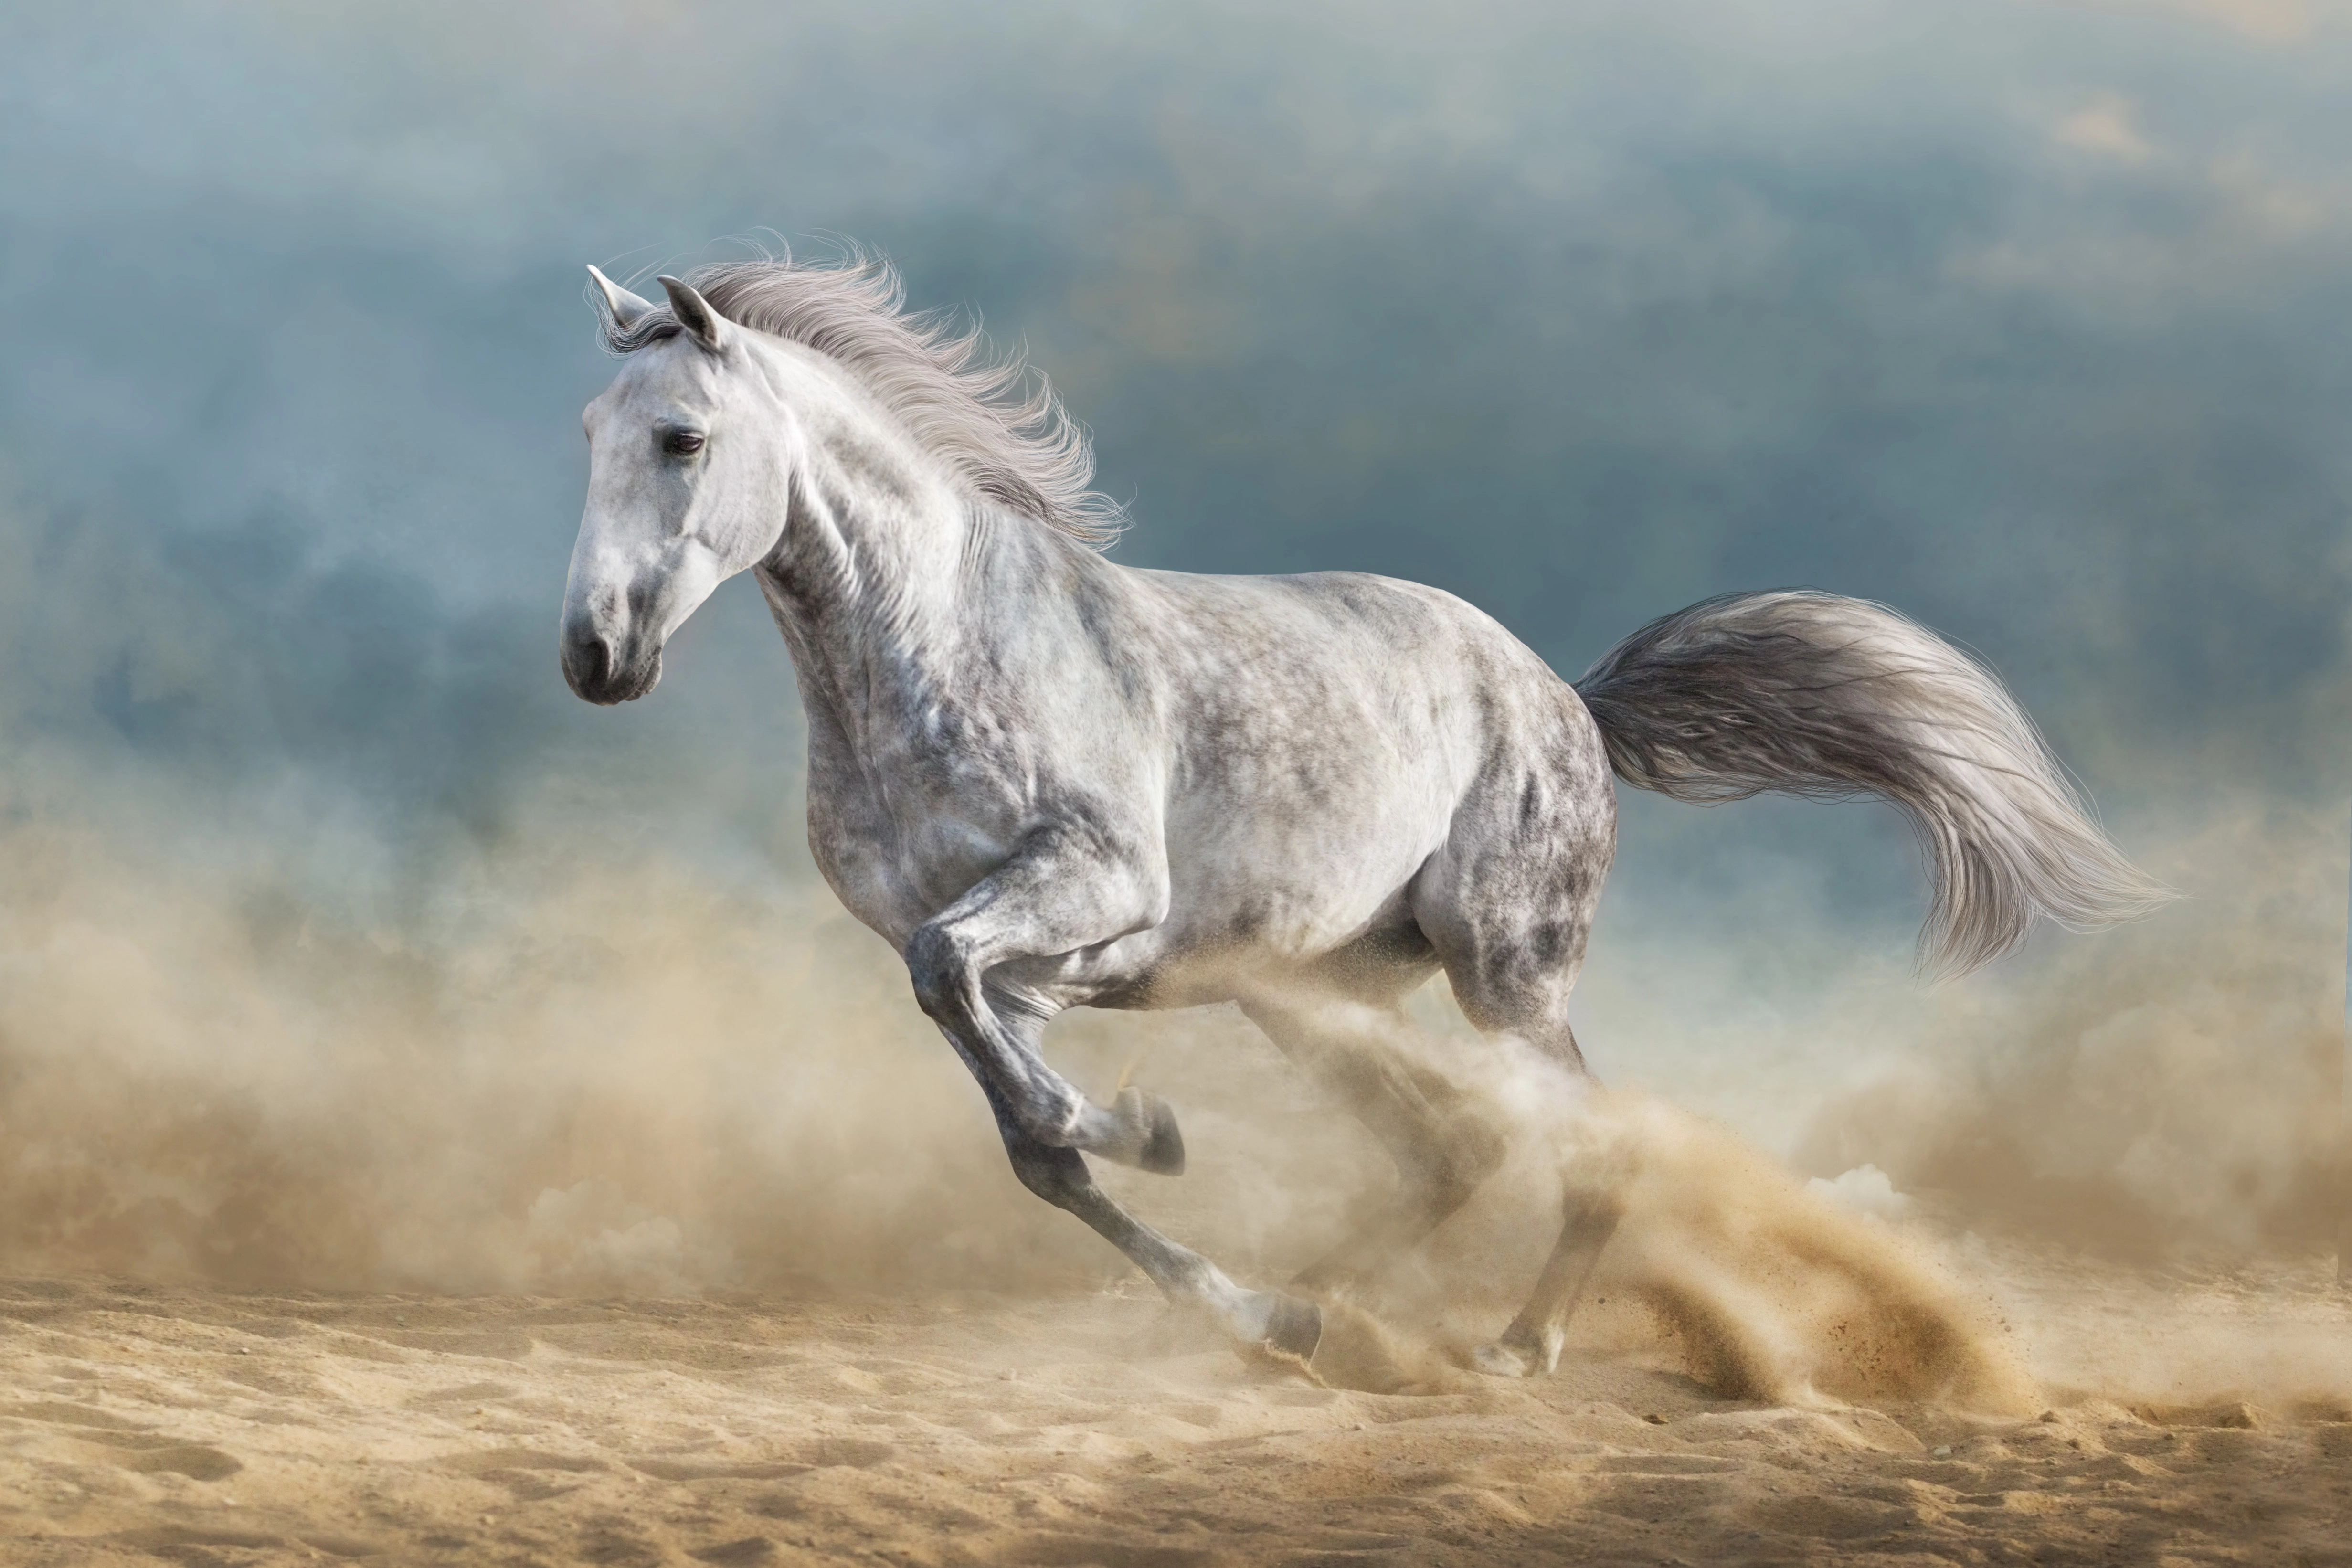 horse galloping on sand